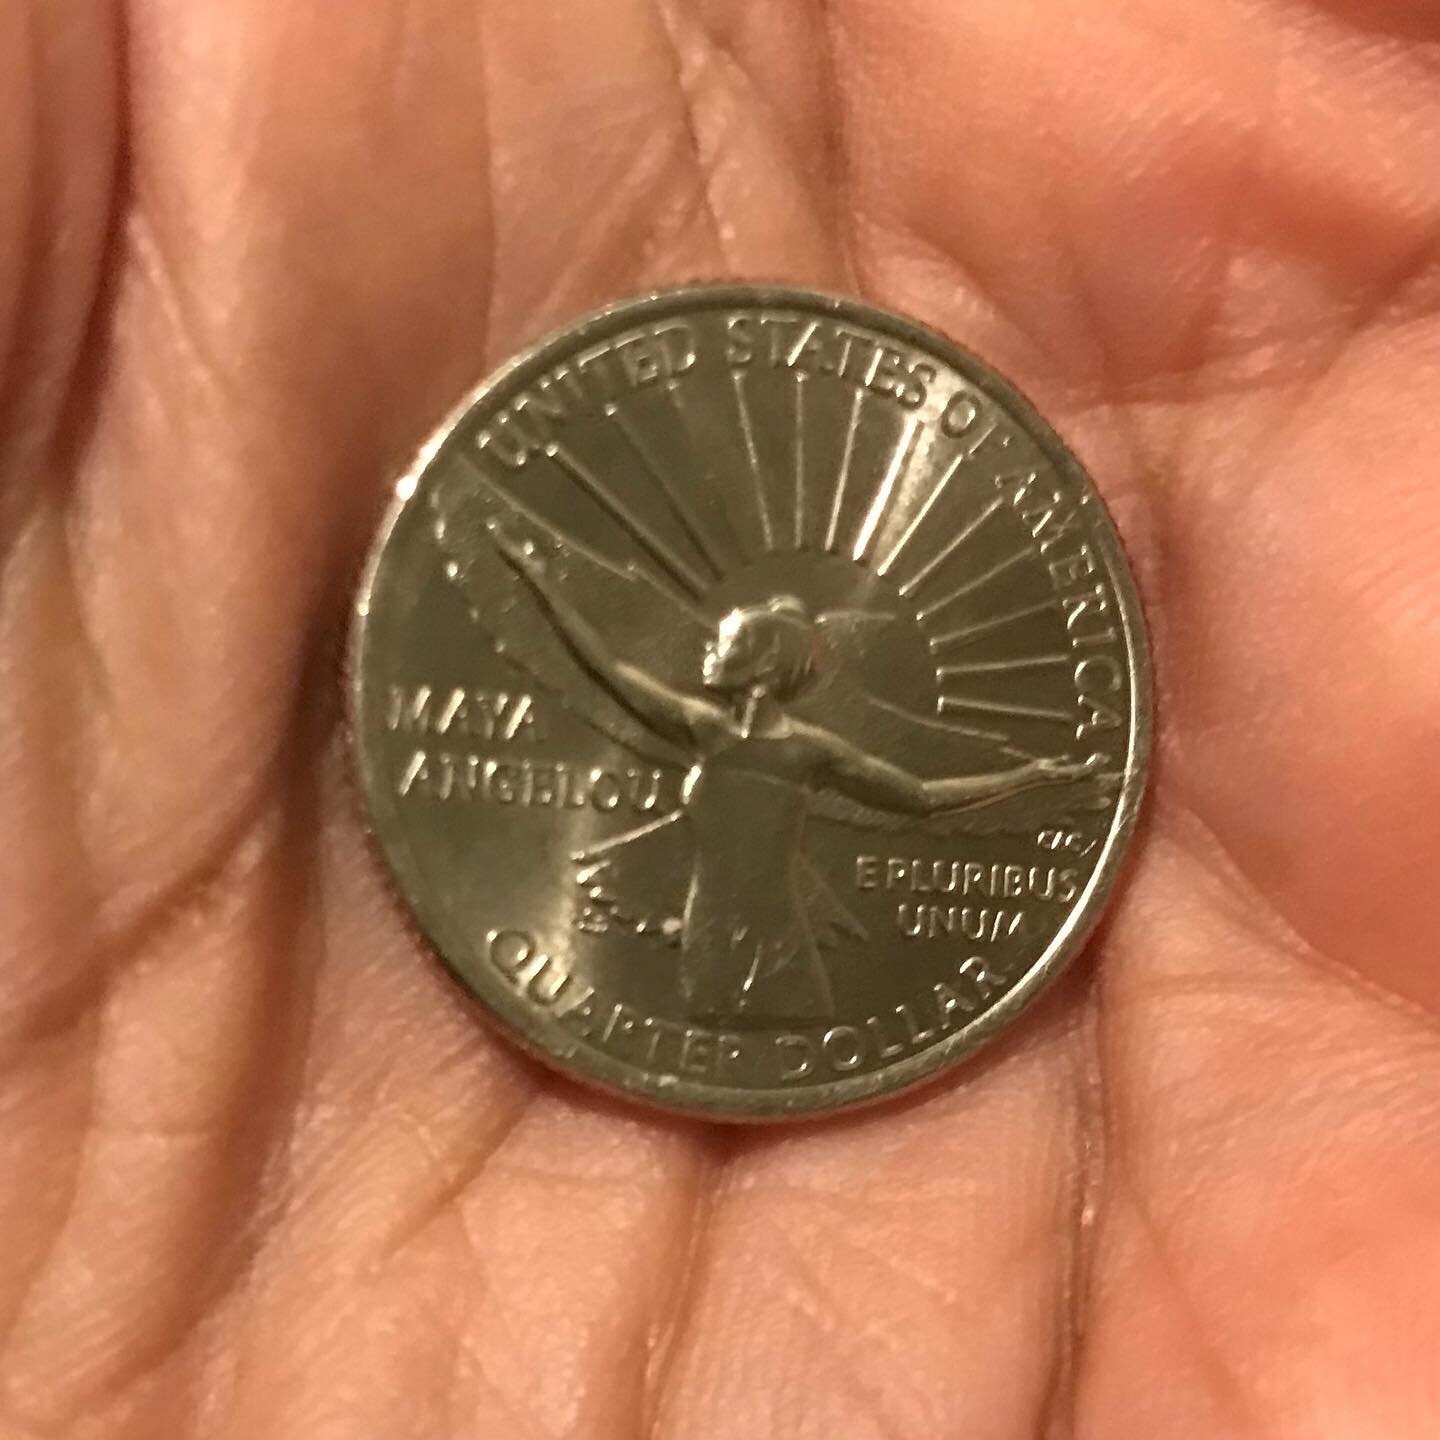 Got a Maya Angelou quarter in my change today!